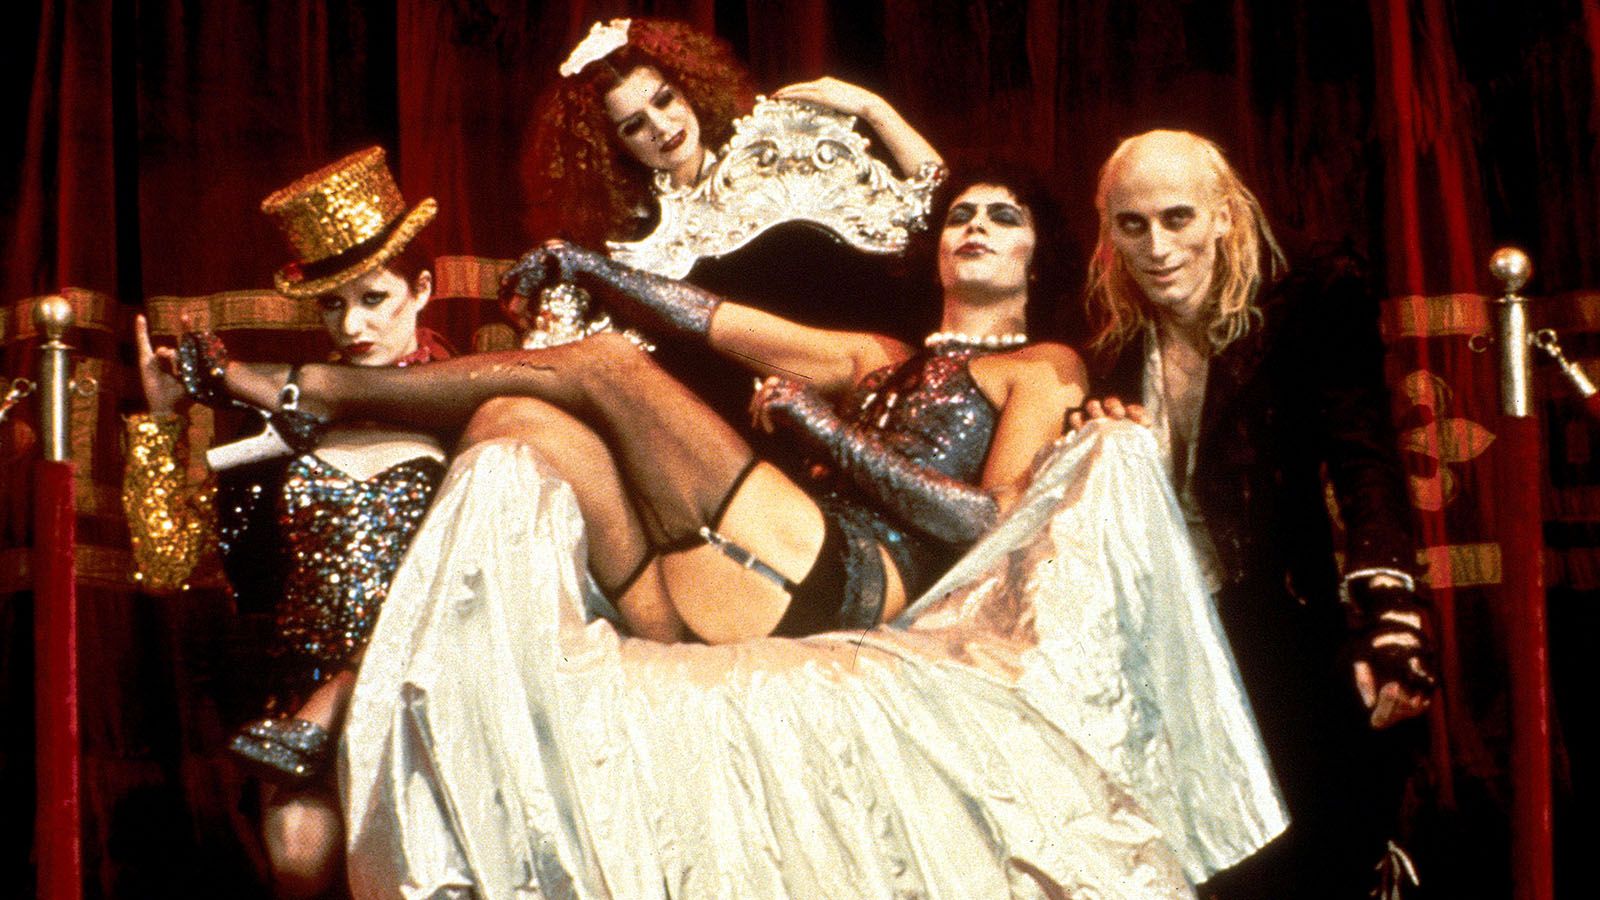 You'll have three opportunities to catch "Rocky Horror Picture Show" in our area.